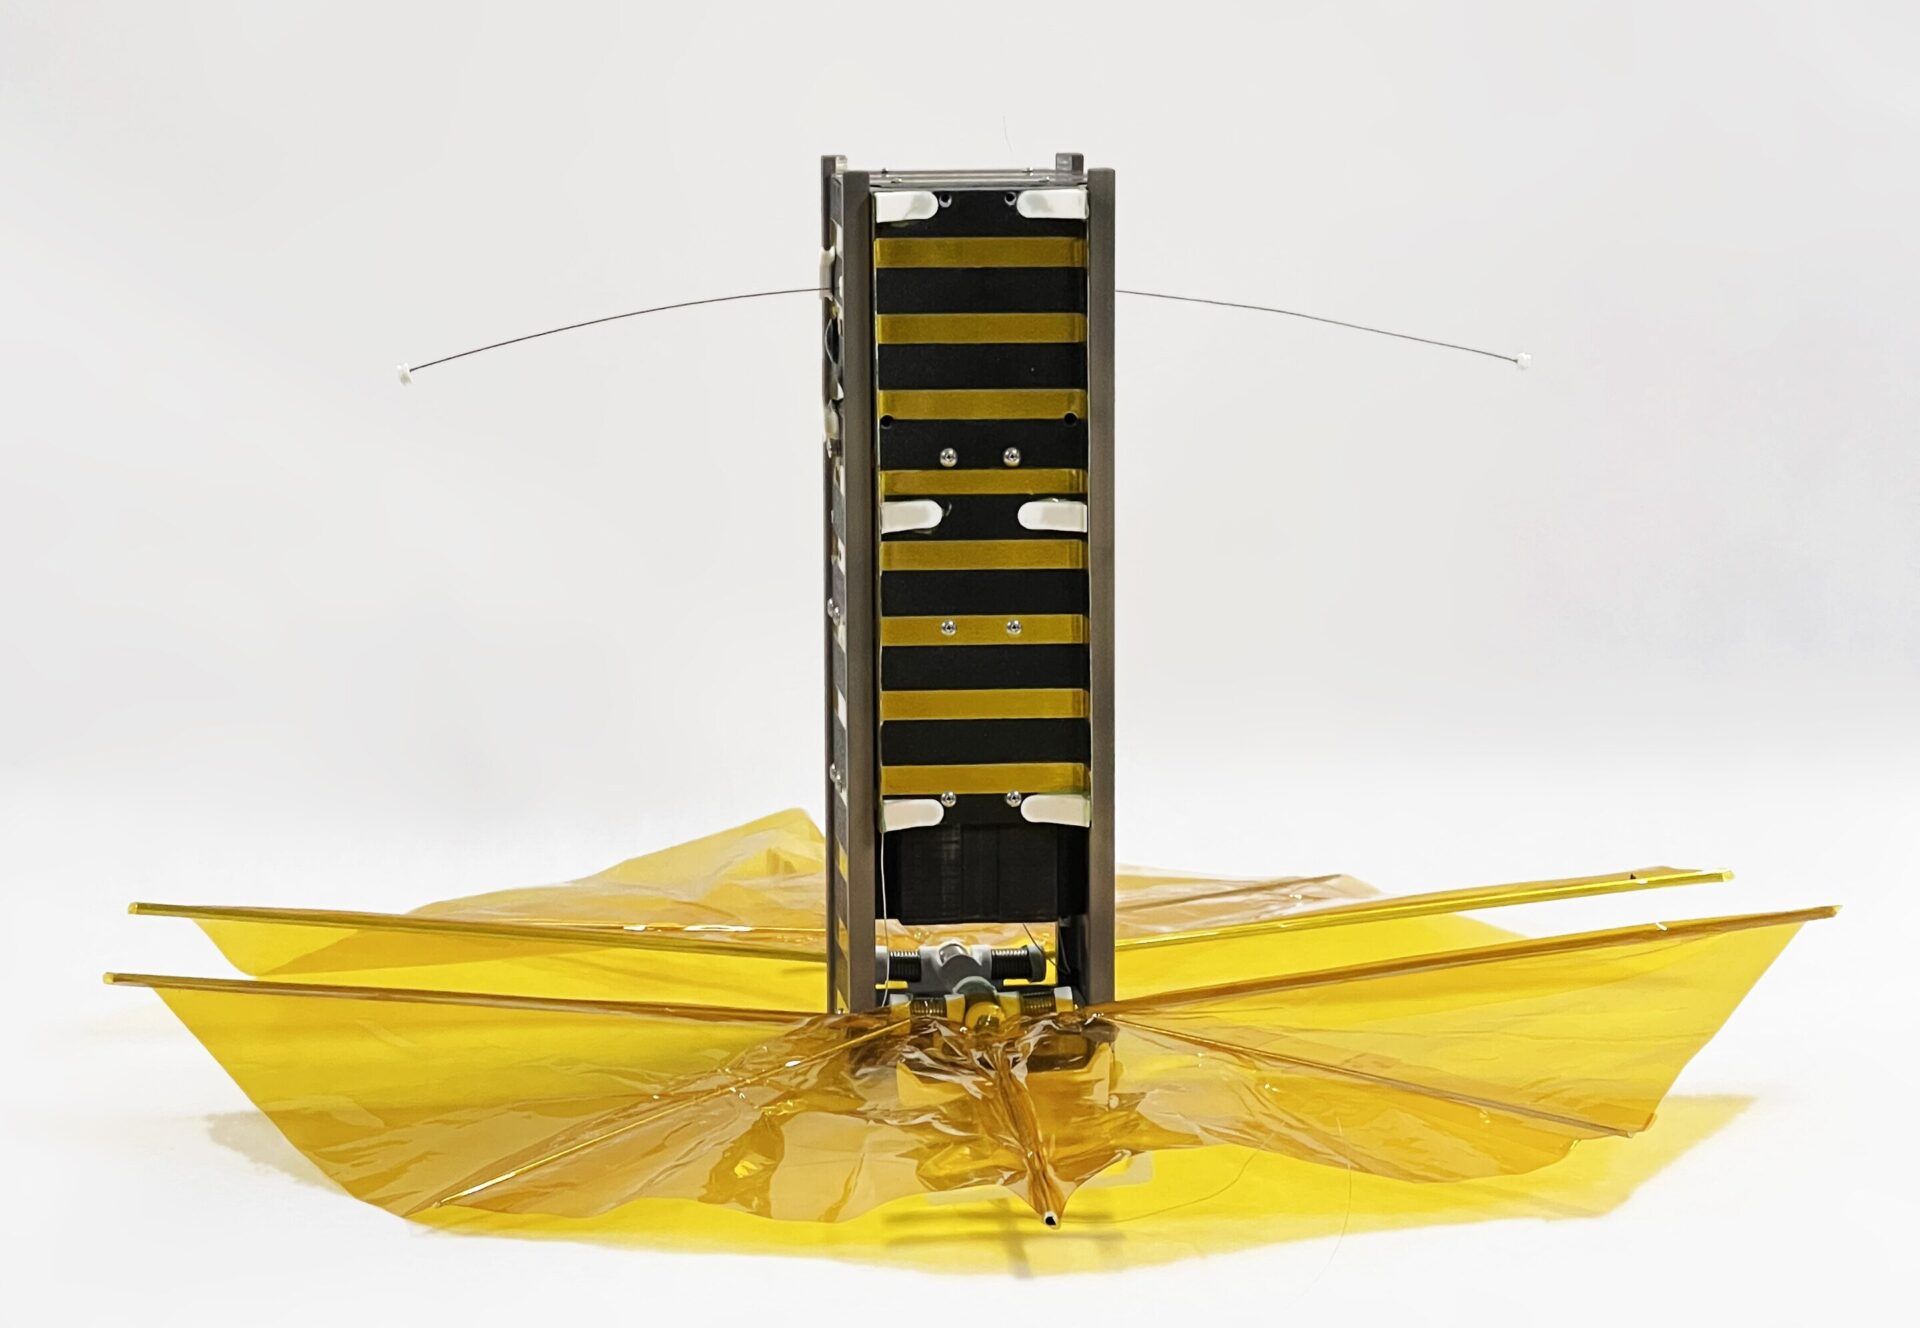 SBUDNIC, a bread-loaf-sized cube satellite with a drag sail made from Kapton polyimide film, designed and built by students at Brown reentered Earth's atmosphere five years ahead of schedule. Image courtesy of Marco Cross.